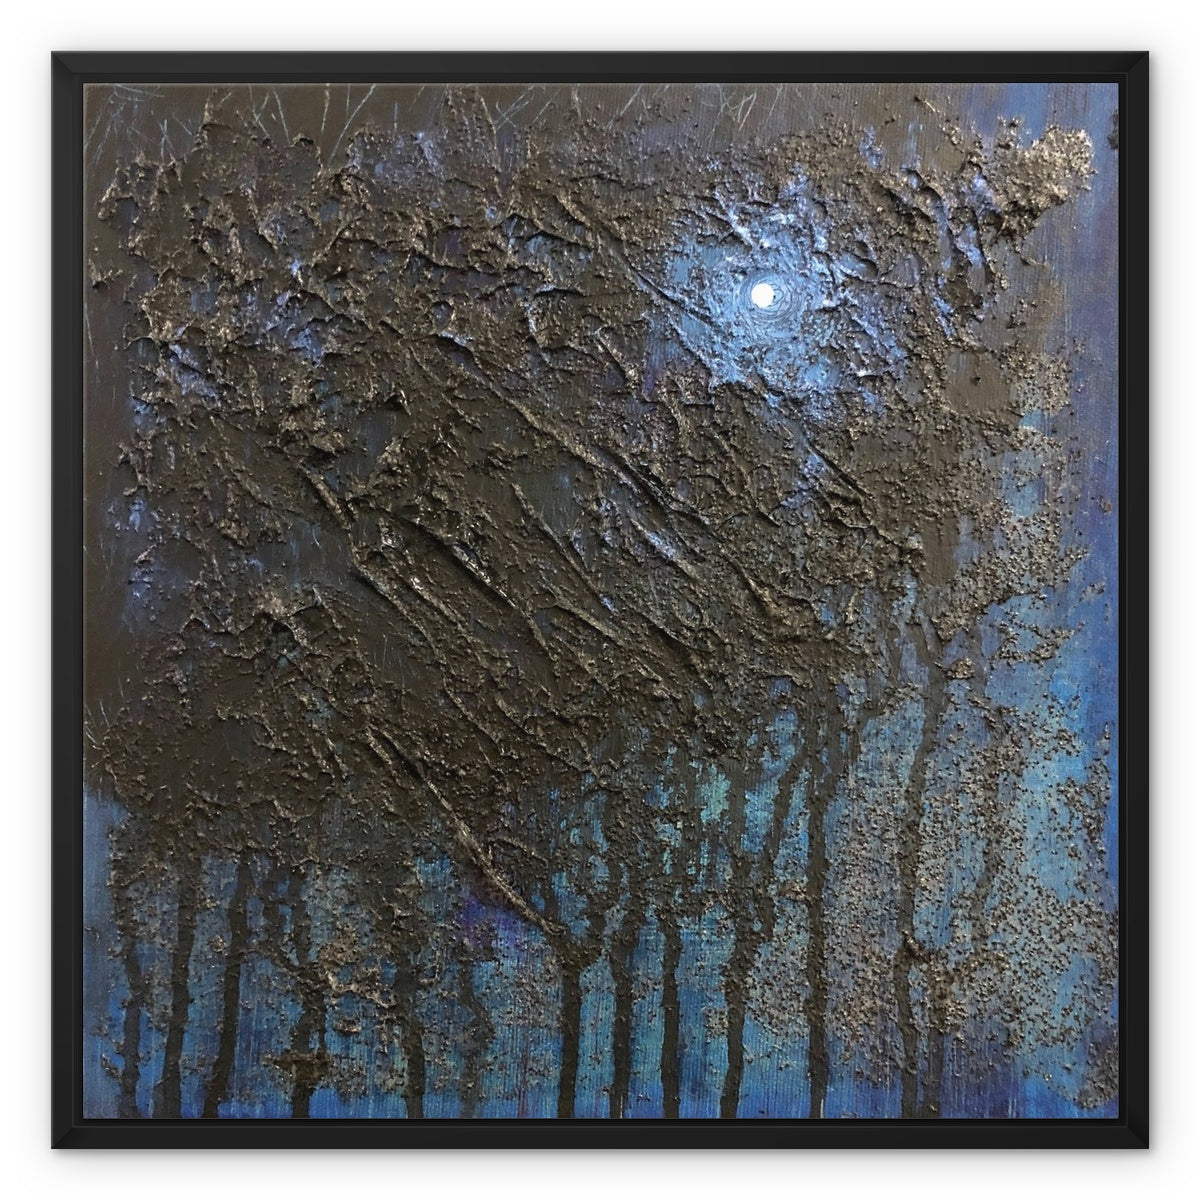 The Blue Moon Wood Abstract Painting | Framed Canvas From Scotland-Floating Framed Canvas Prints-Abstract & Impressionistic Art Gallery-24"x24"-Paintings, Prints, Homeware, Art Gifts From Scotland By Scottish Artist Kevin Hunter